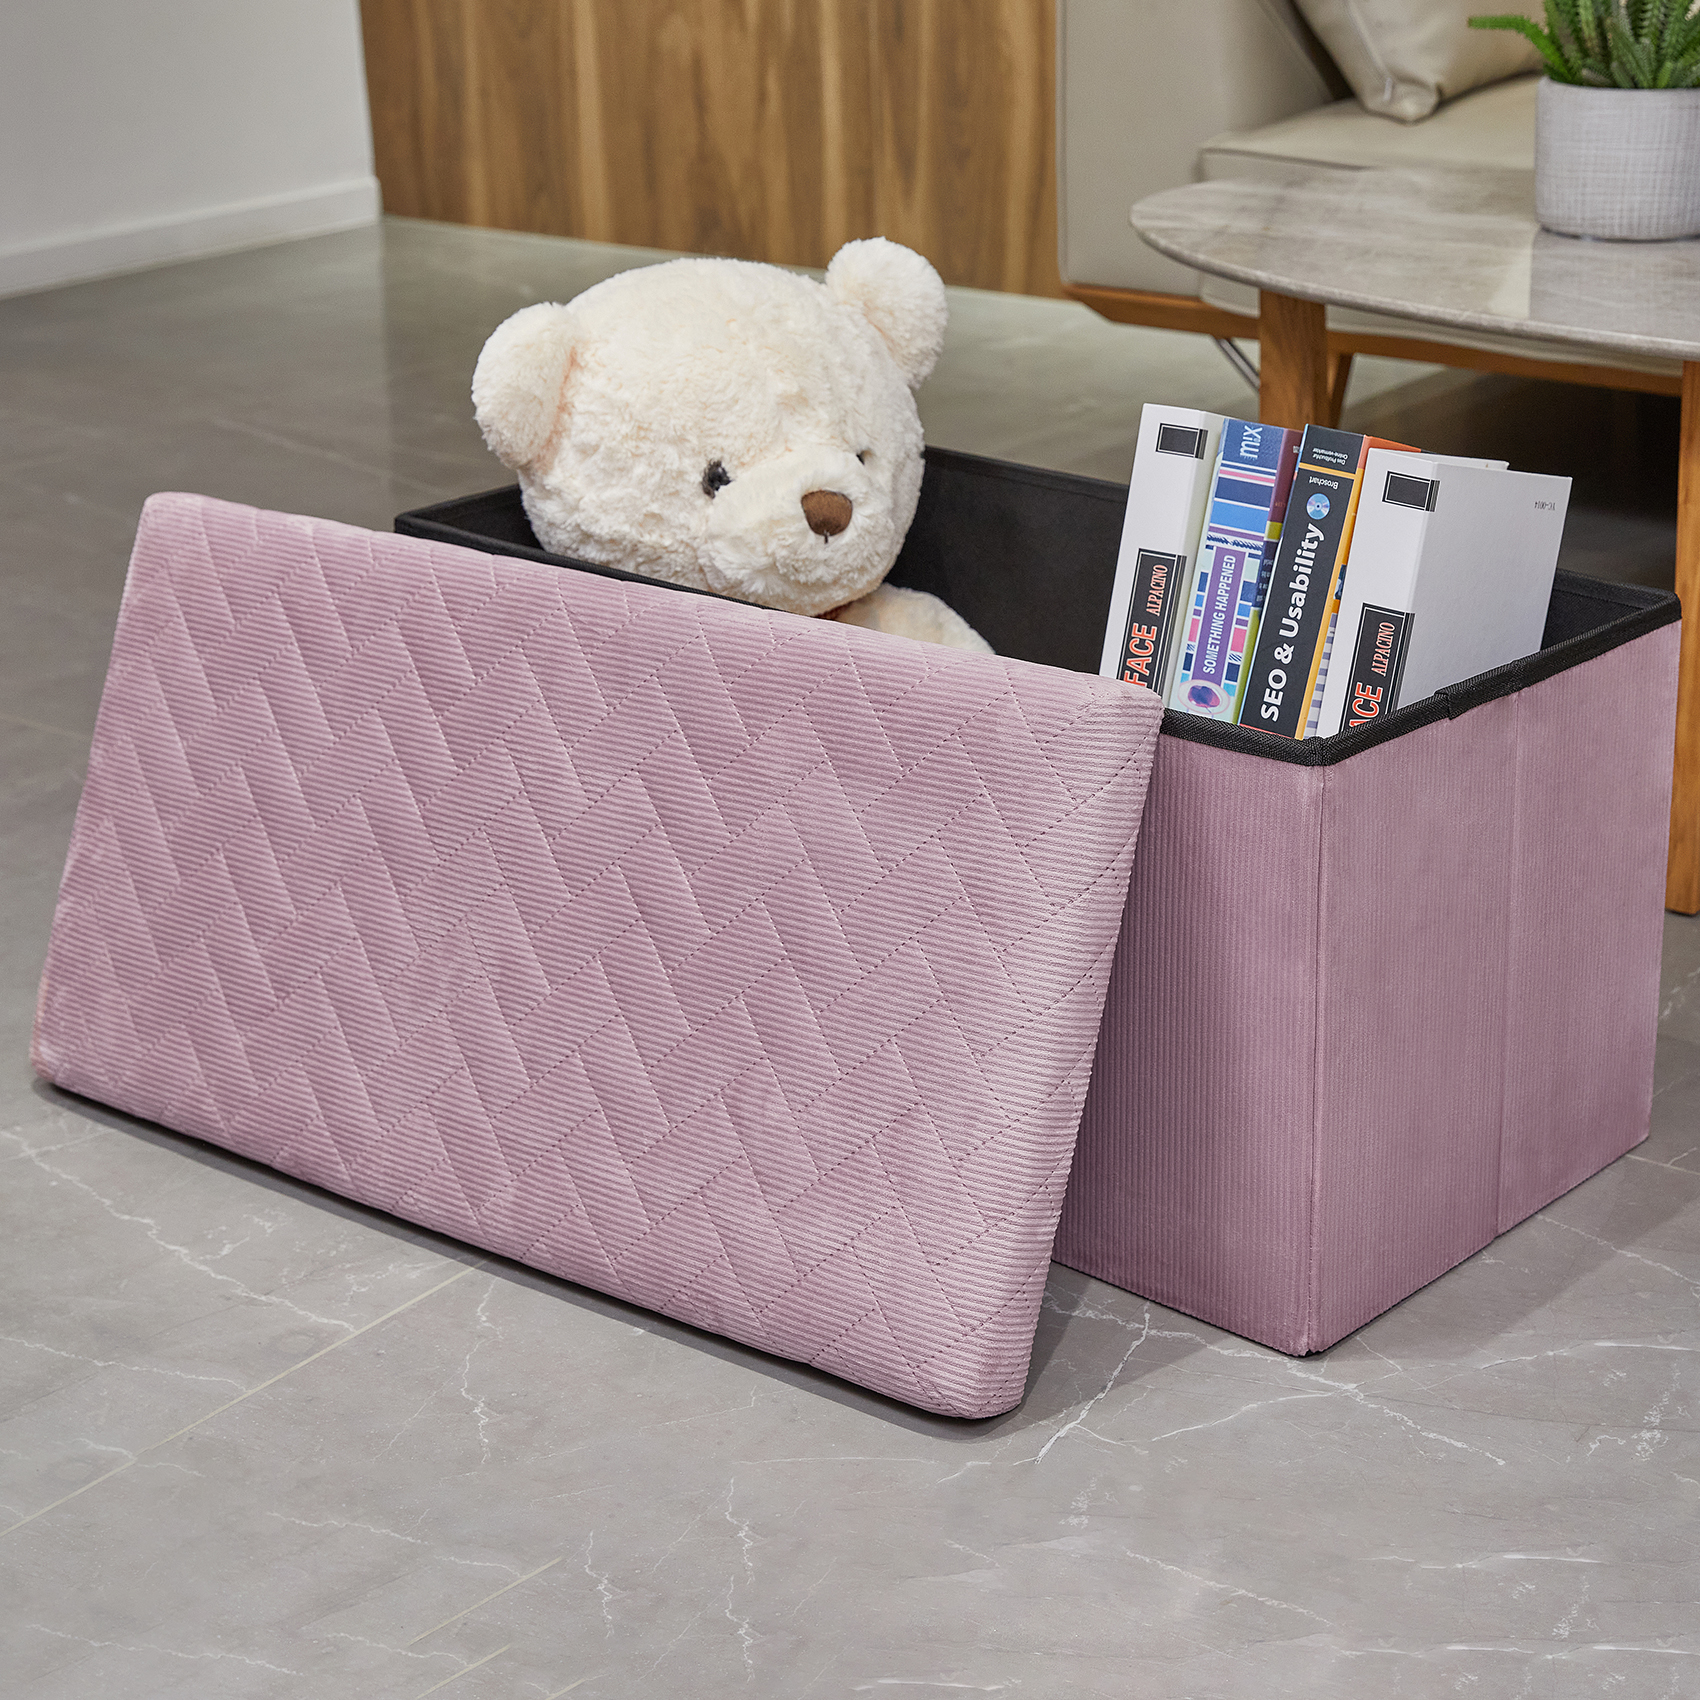 PINPLUS 30.1" Folding Pink Velvet  Storage Ottoman Bench with Lid for Living Room, Long Shoes Bench, Toys Chest Box, Foot Rest Stool Seat - image 3 of 7